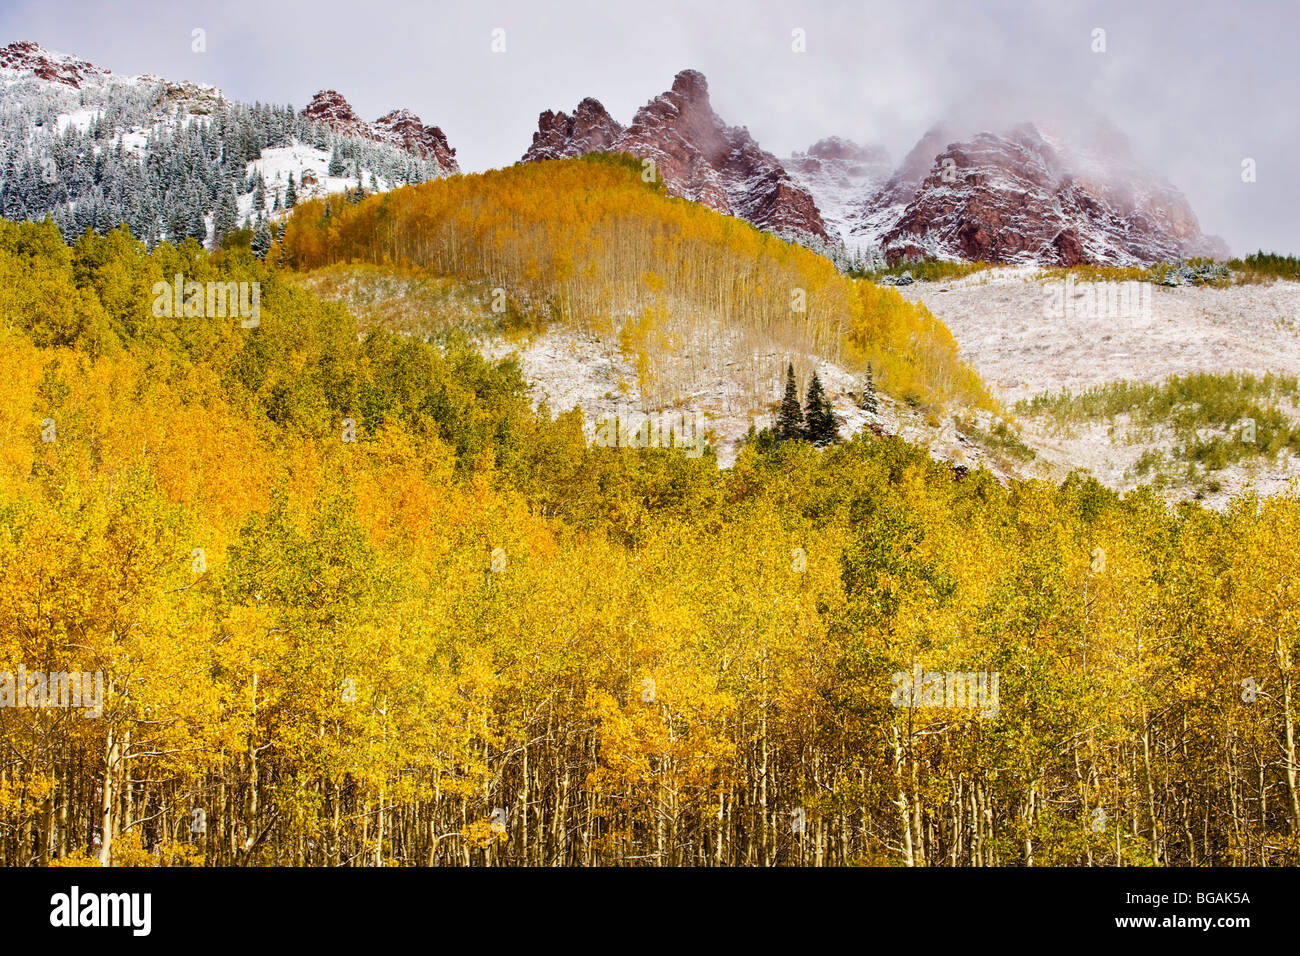 Mountain range with aspens and silver birch trees during the fall season. Stock Photo